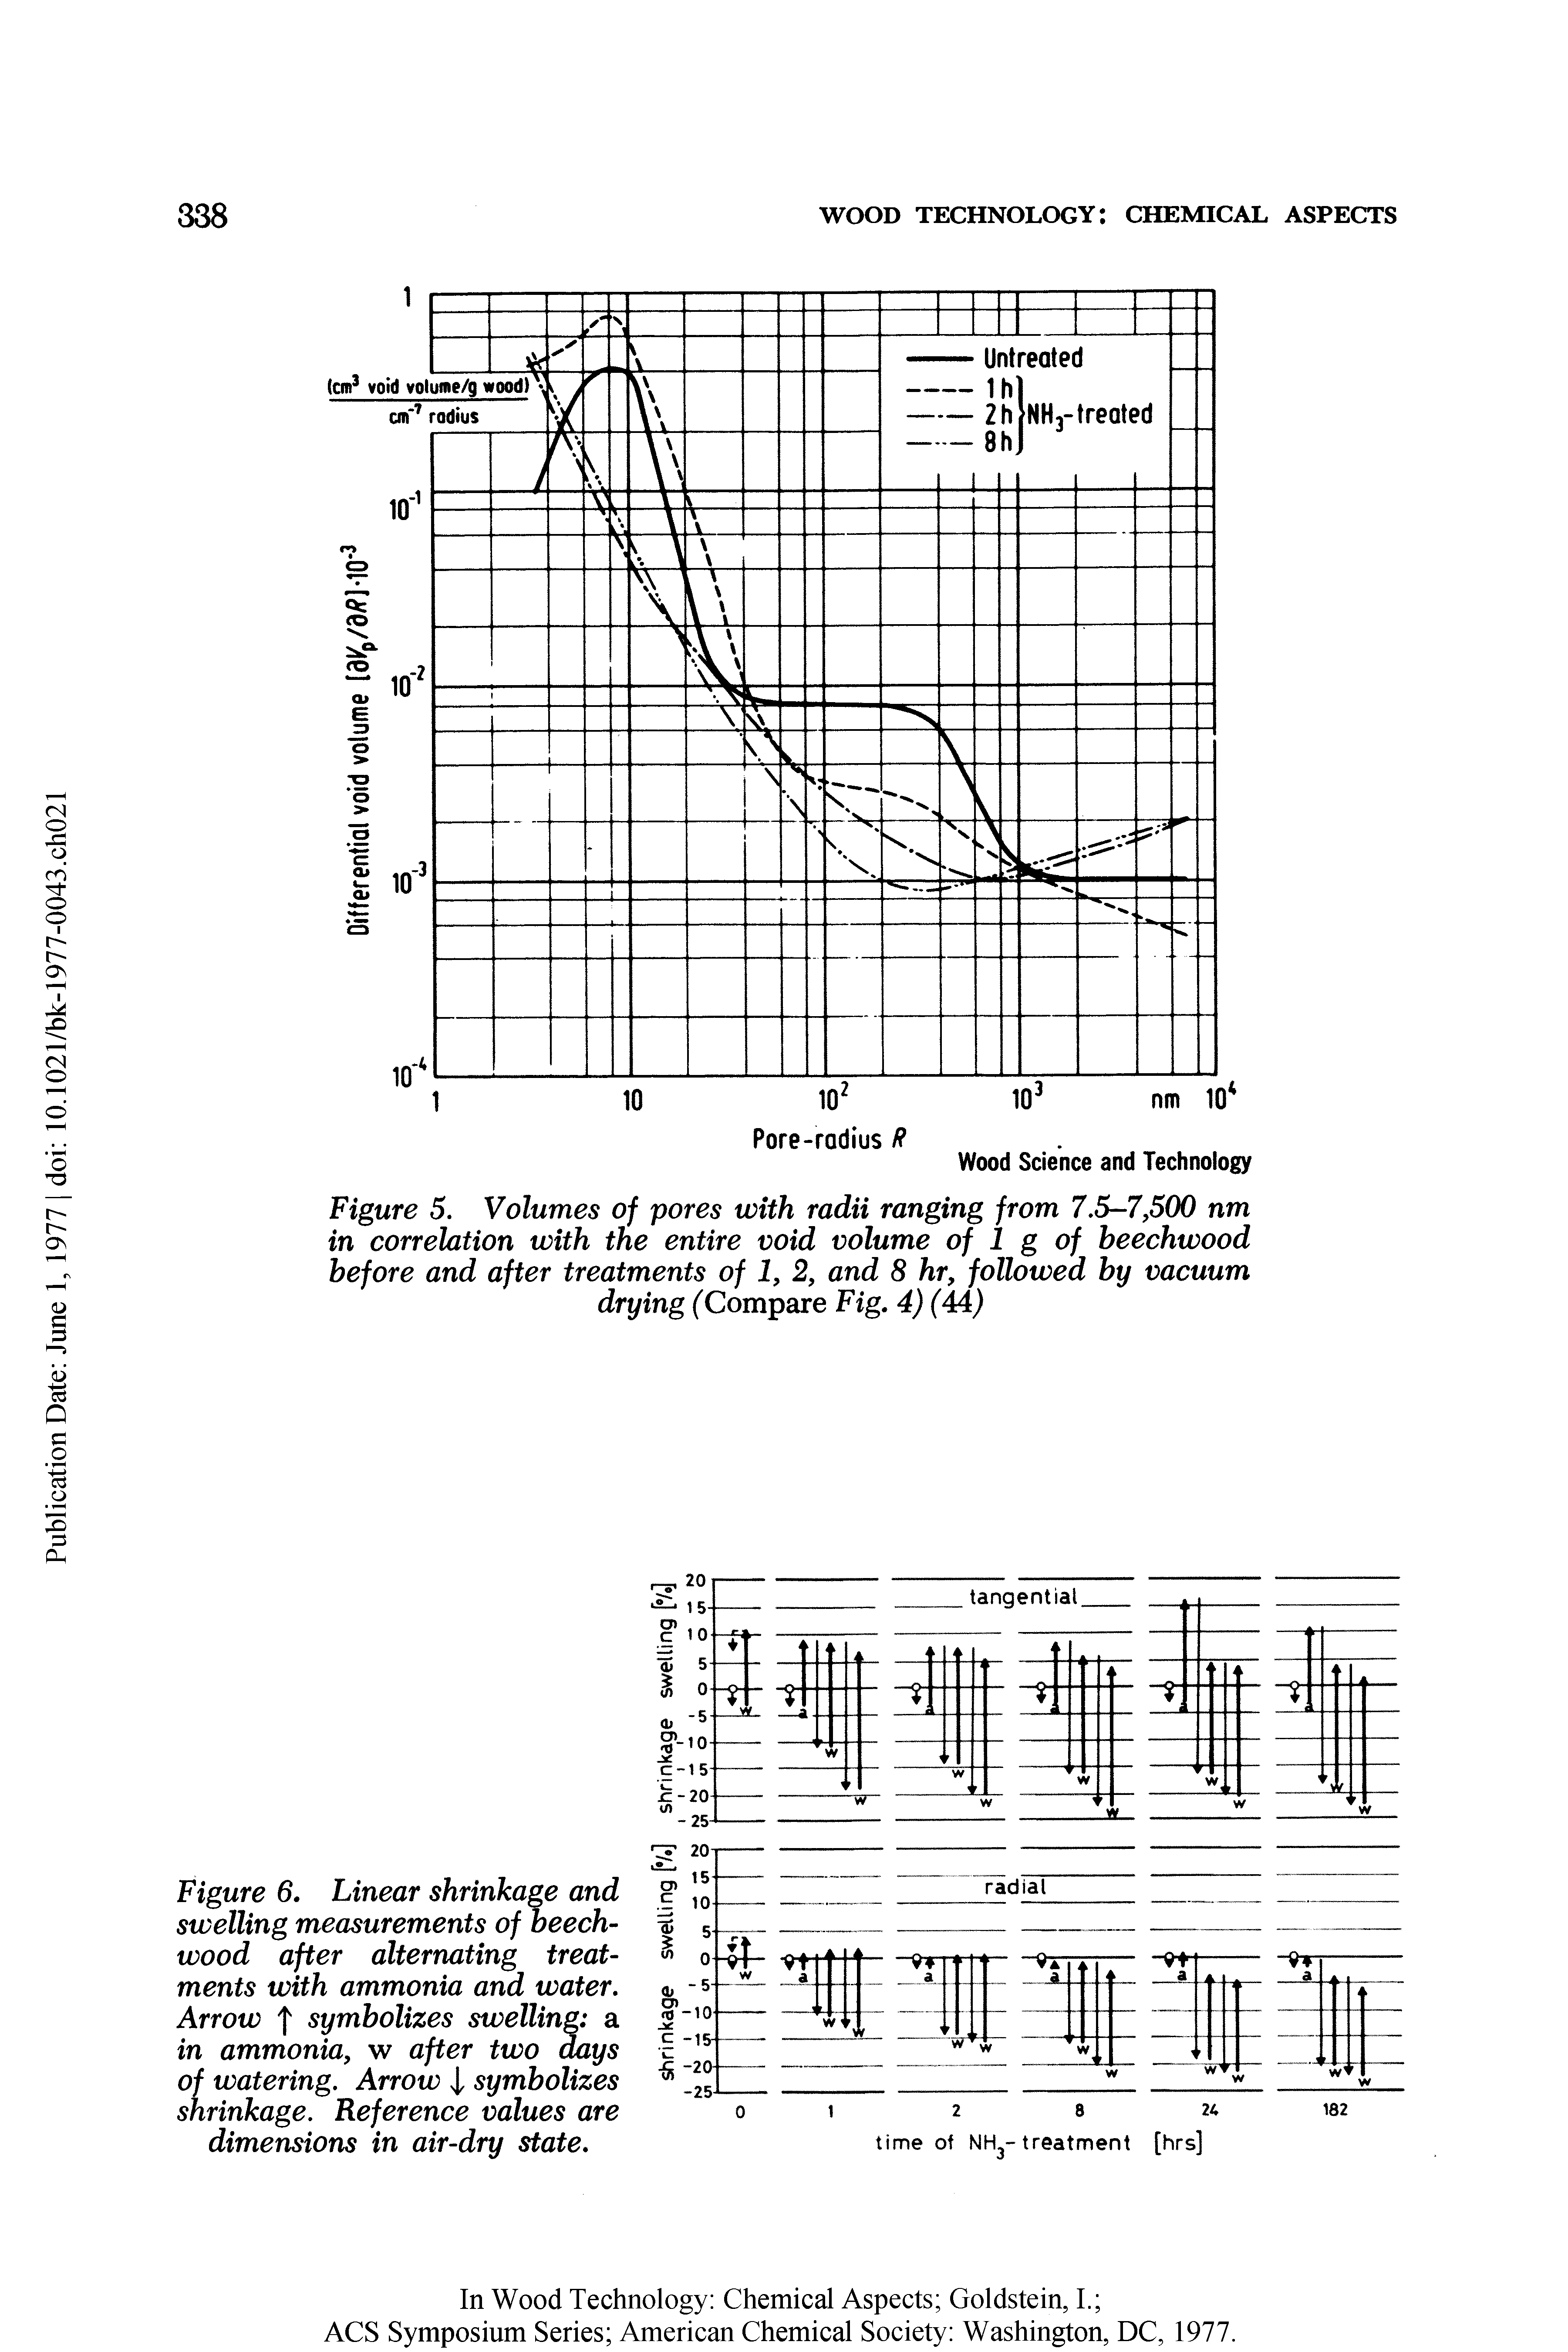 Figure 6. Linear shrinkage and swelling measurements of beech-wood after alternating treatments with ammonia and water. Arrow f symbolizes swelling a in ammonia, w after two days of watering. Arrow J, symbolizes shrinkage. Reference values are dimensions in air-dry state.